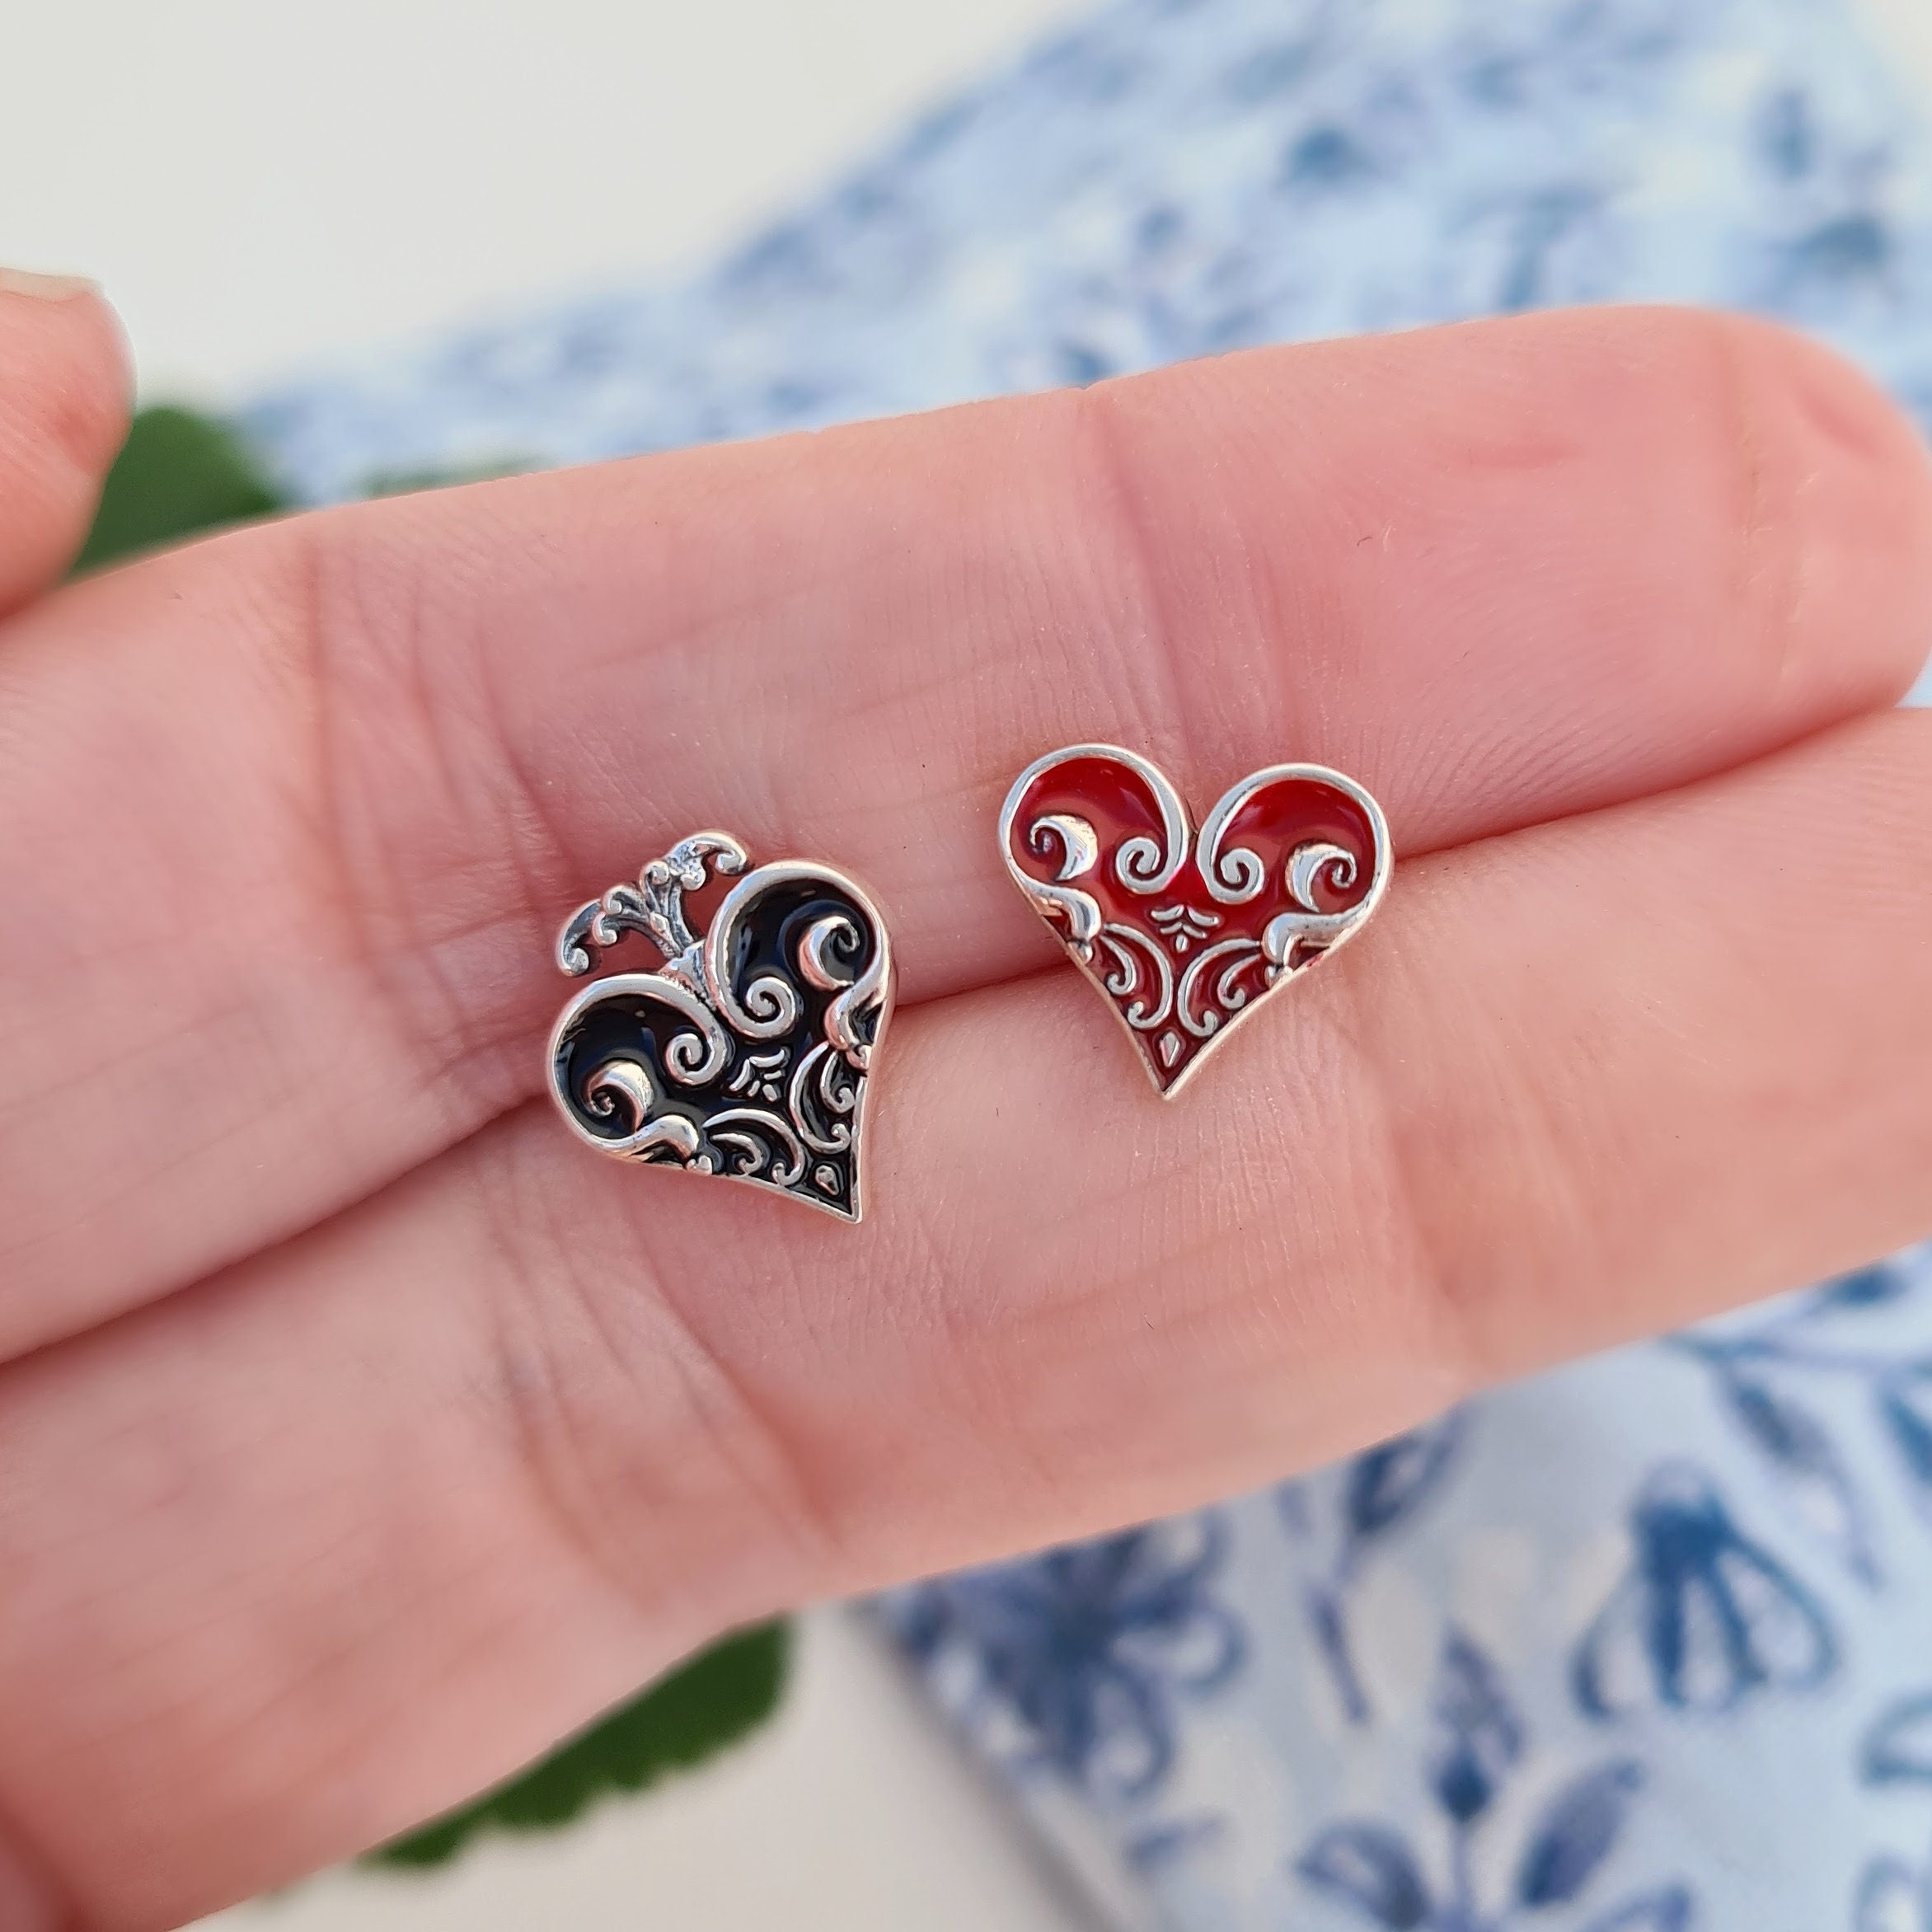 JIUIQL Unique Funny 18K Gold Plated Hypoallergenic Long Poker Hearts and Spades A Ace Playing Cards Dangle Drop Stud Earrings for Women Girls